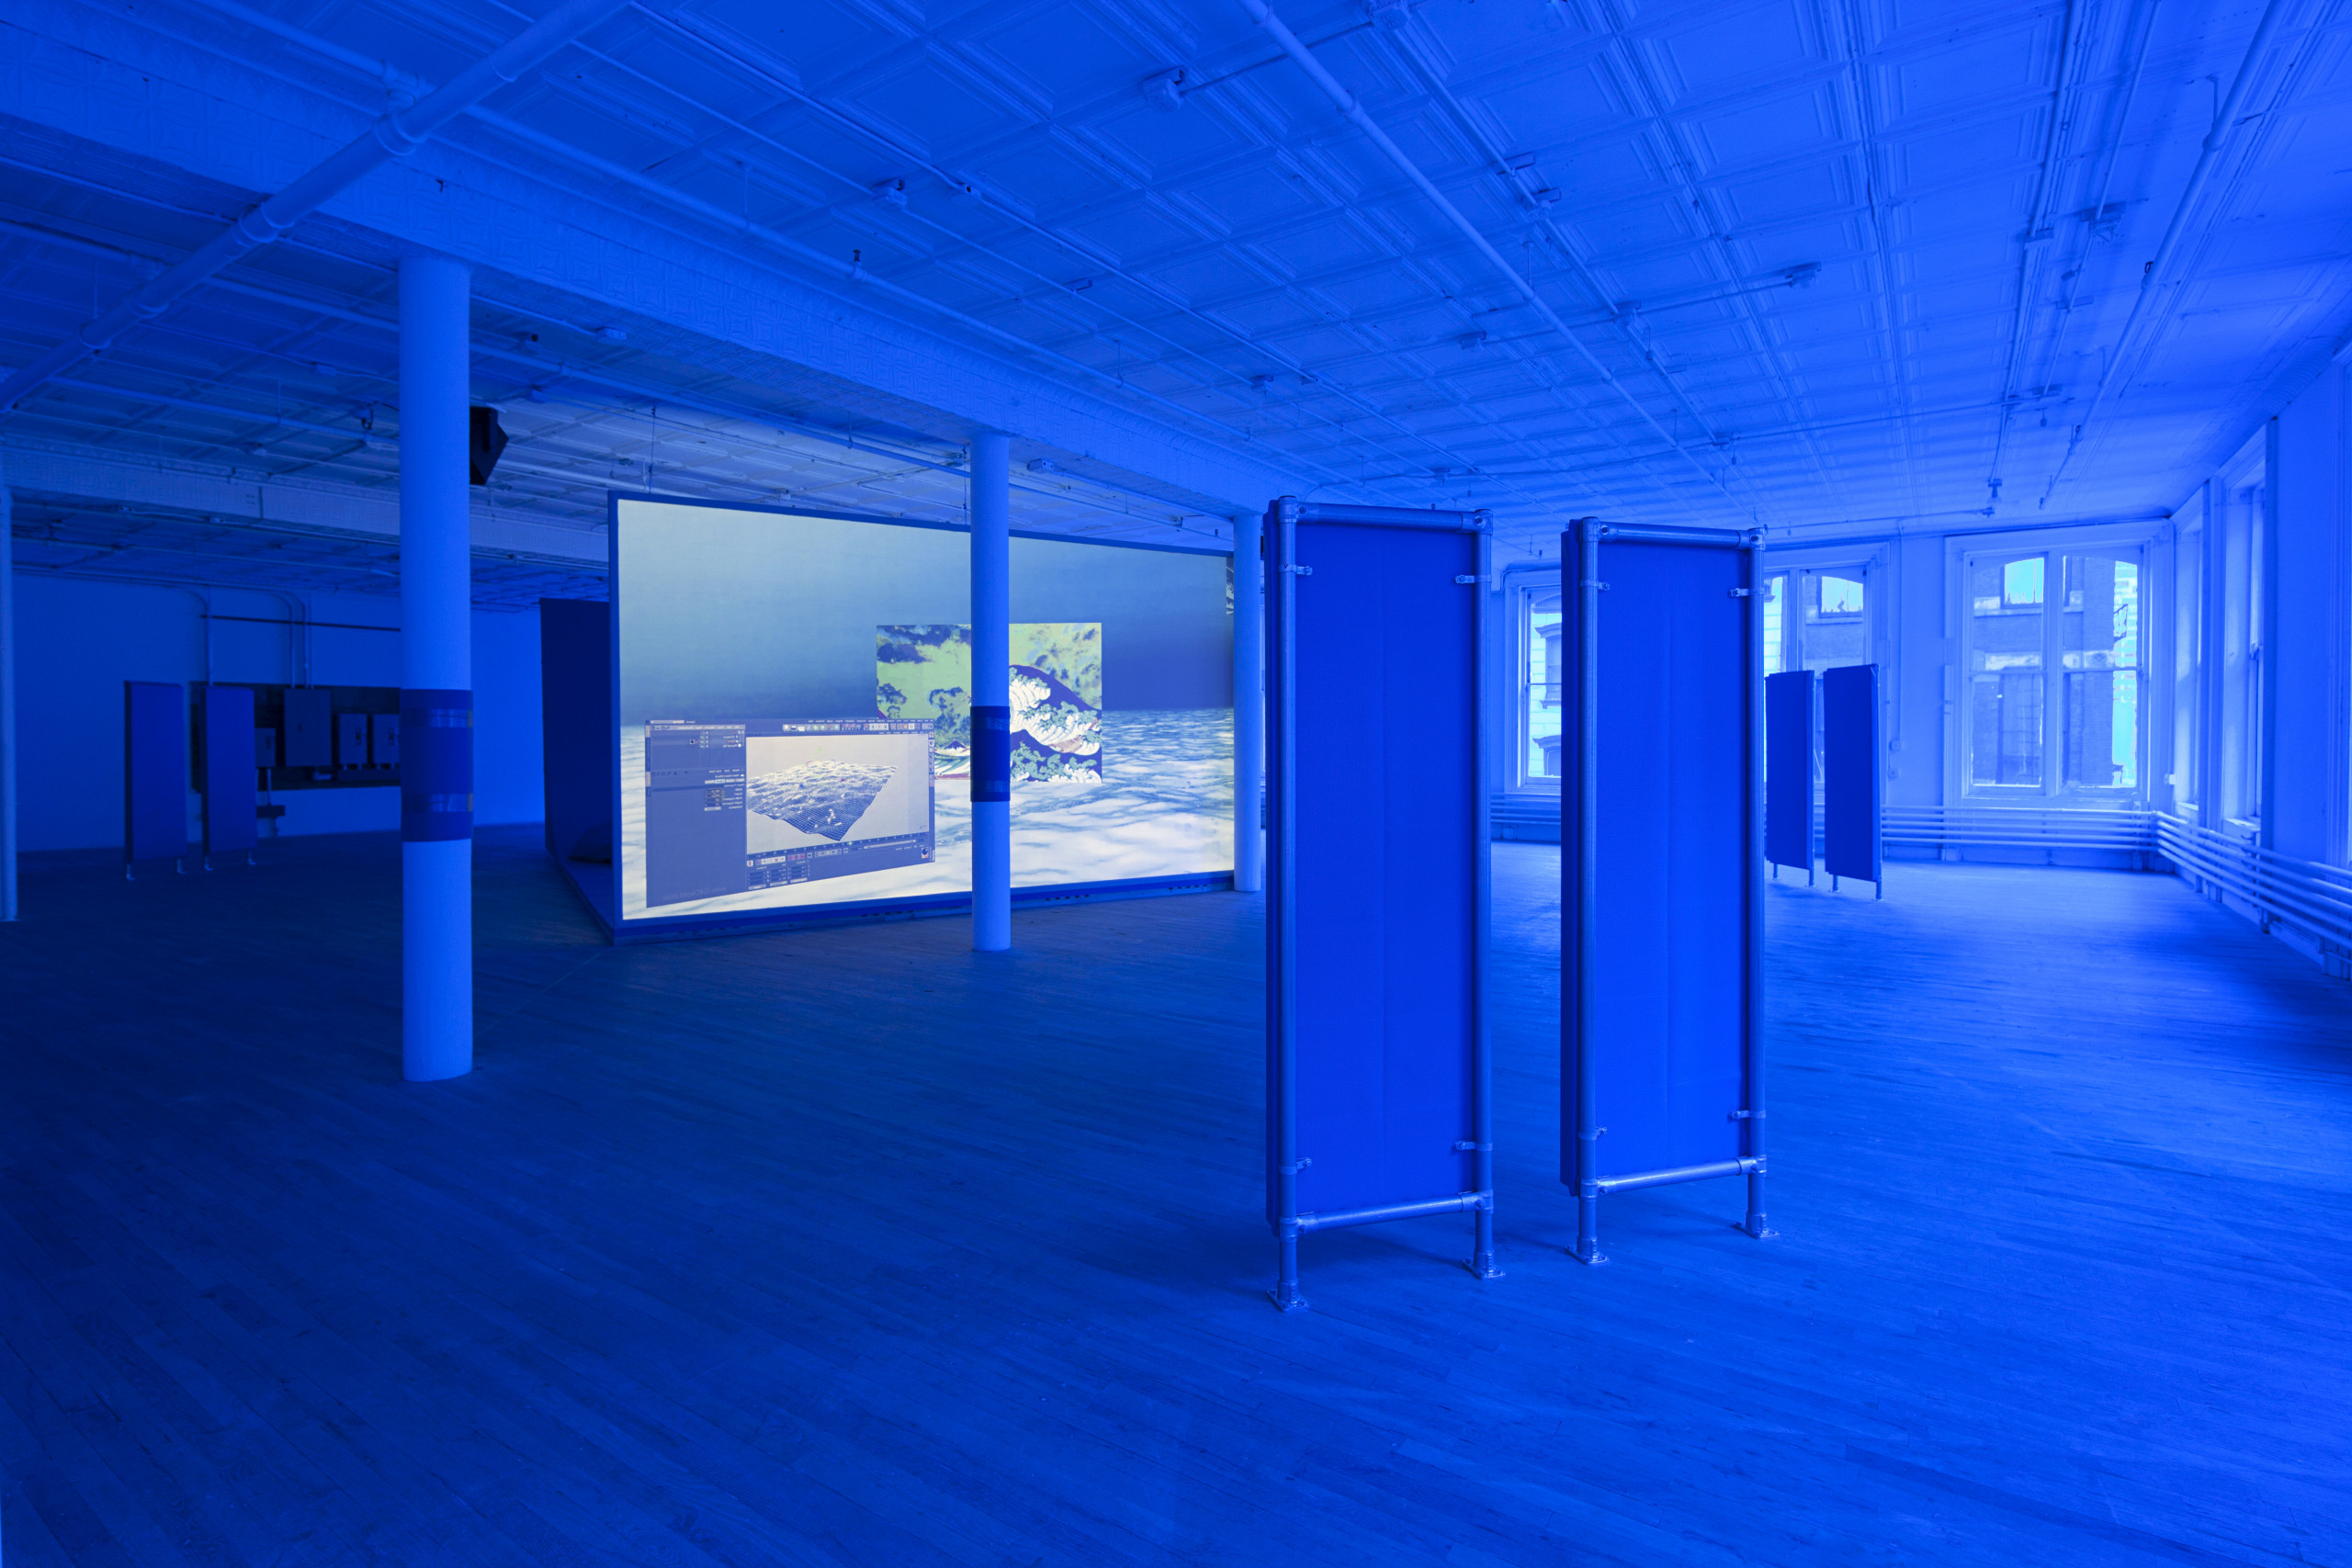 An angled view of a large video monitor screen positioned on the ground behind a collumn. The room is tinted blue. Three pairs of pipe-frame panels visible in the front and both sides of the screen, which projects a video-still of a composited frame that includes computer generated images of the ocean.